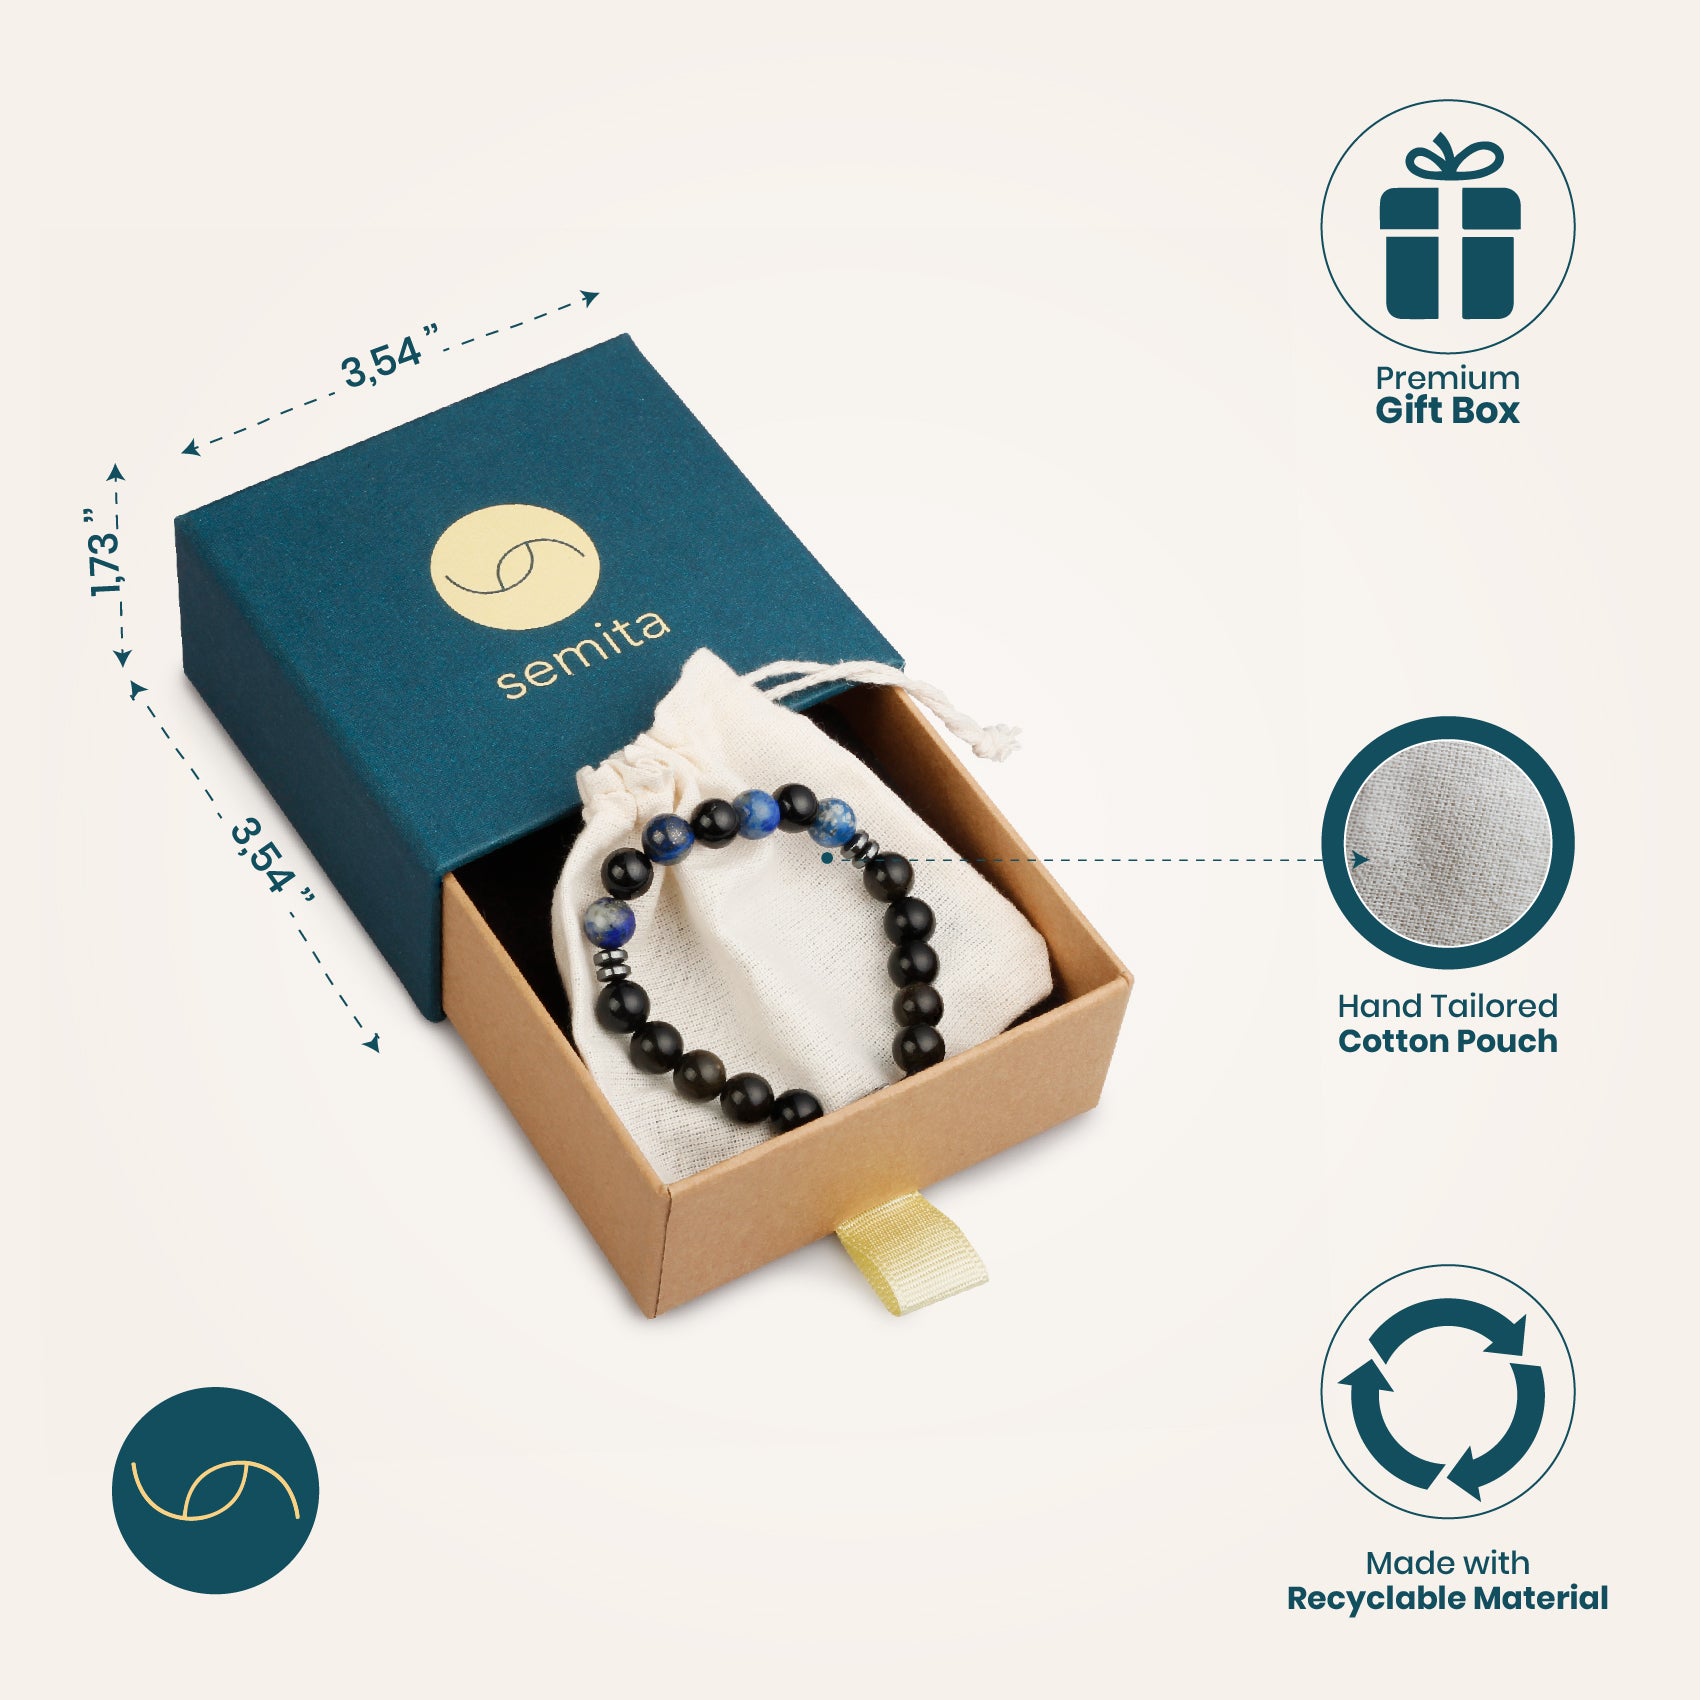 Shield and protection bracelet in premium gift box